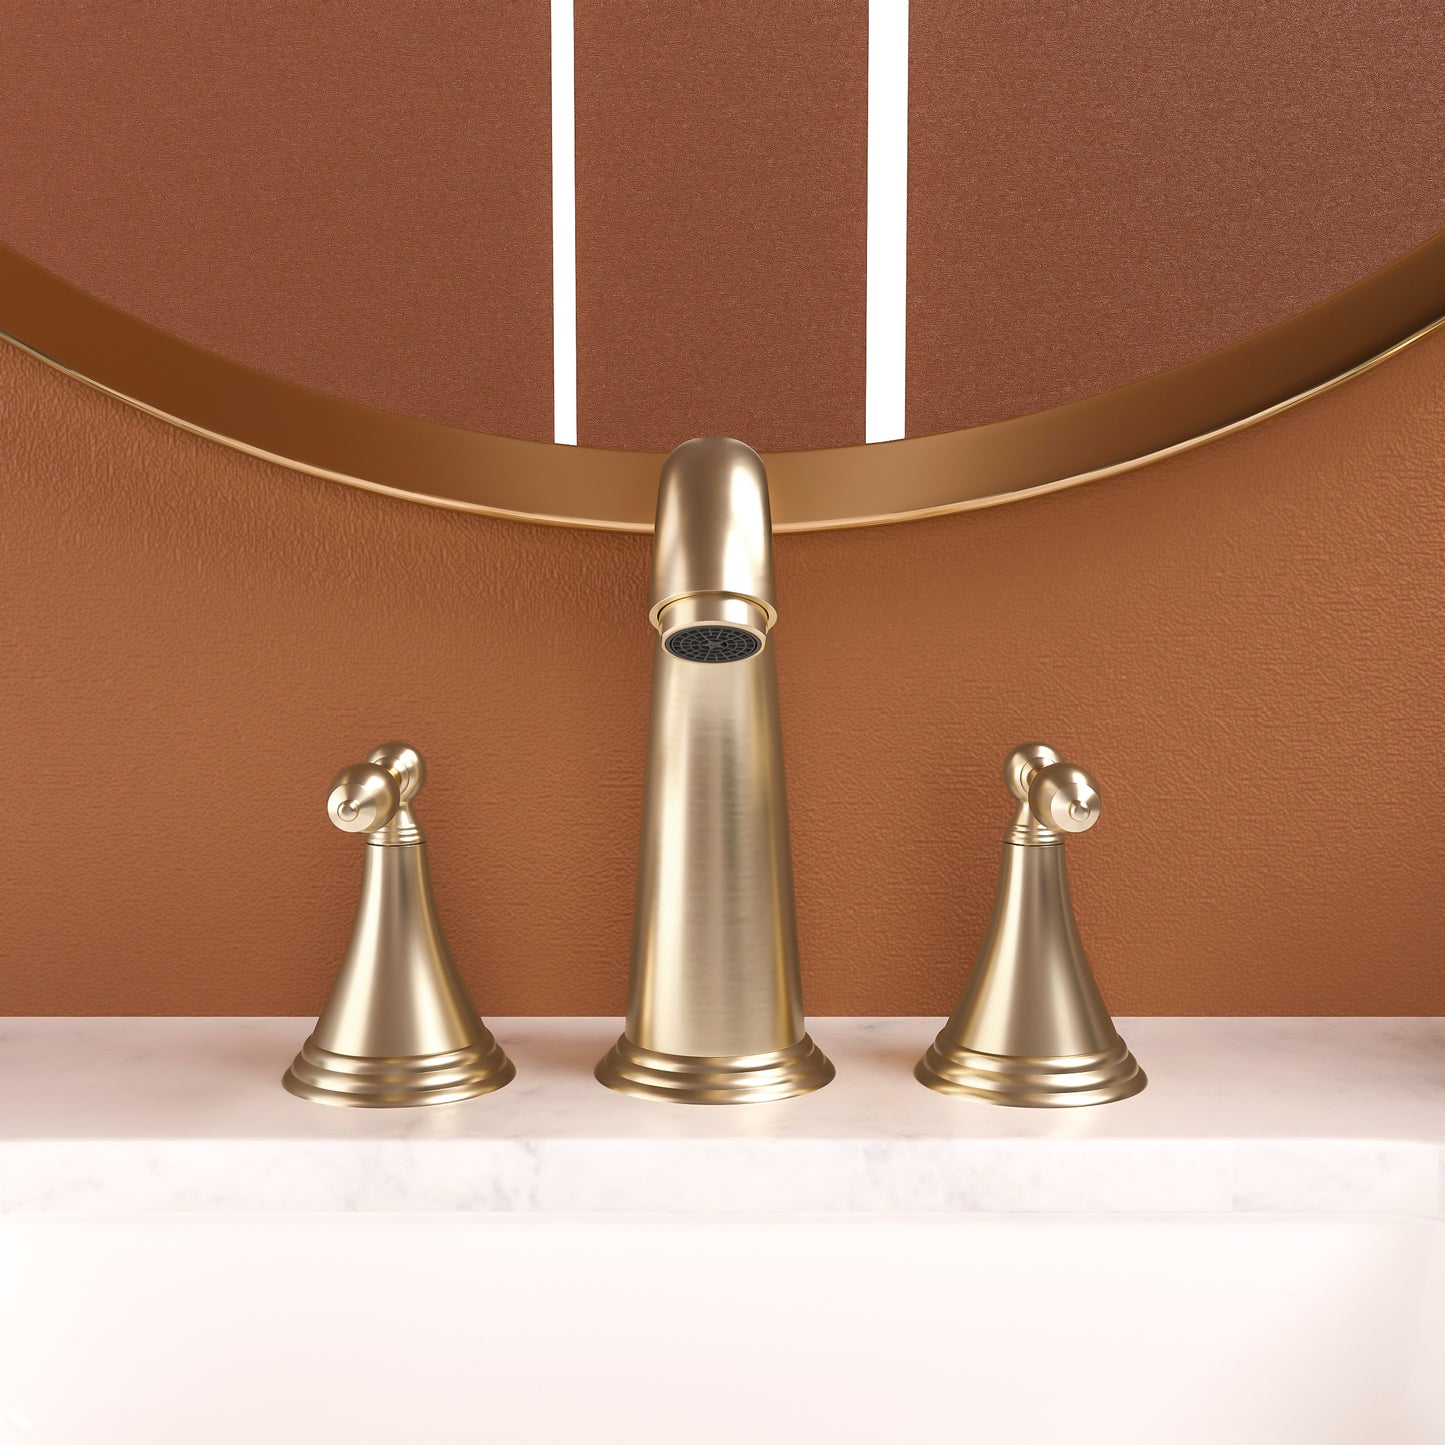 Gold Widespread Bathroom Faucet with Two Handles, Pop-Up Drain, and Water Supply Lines